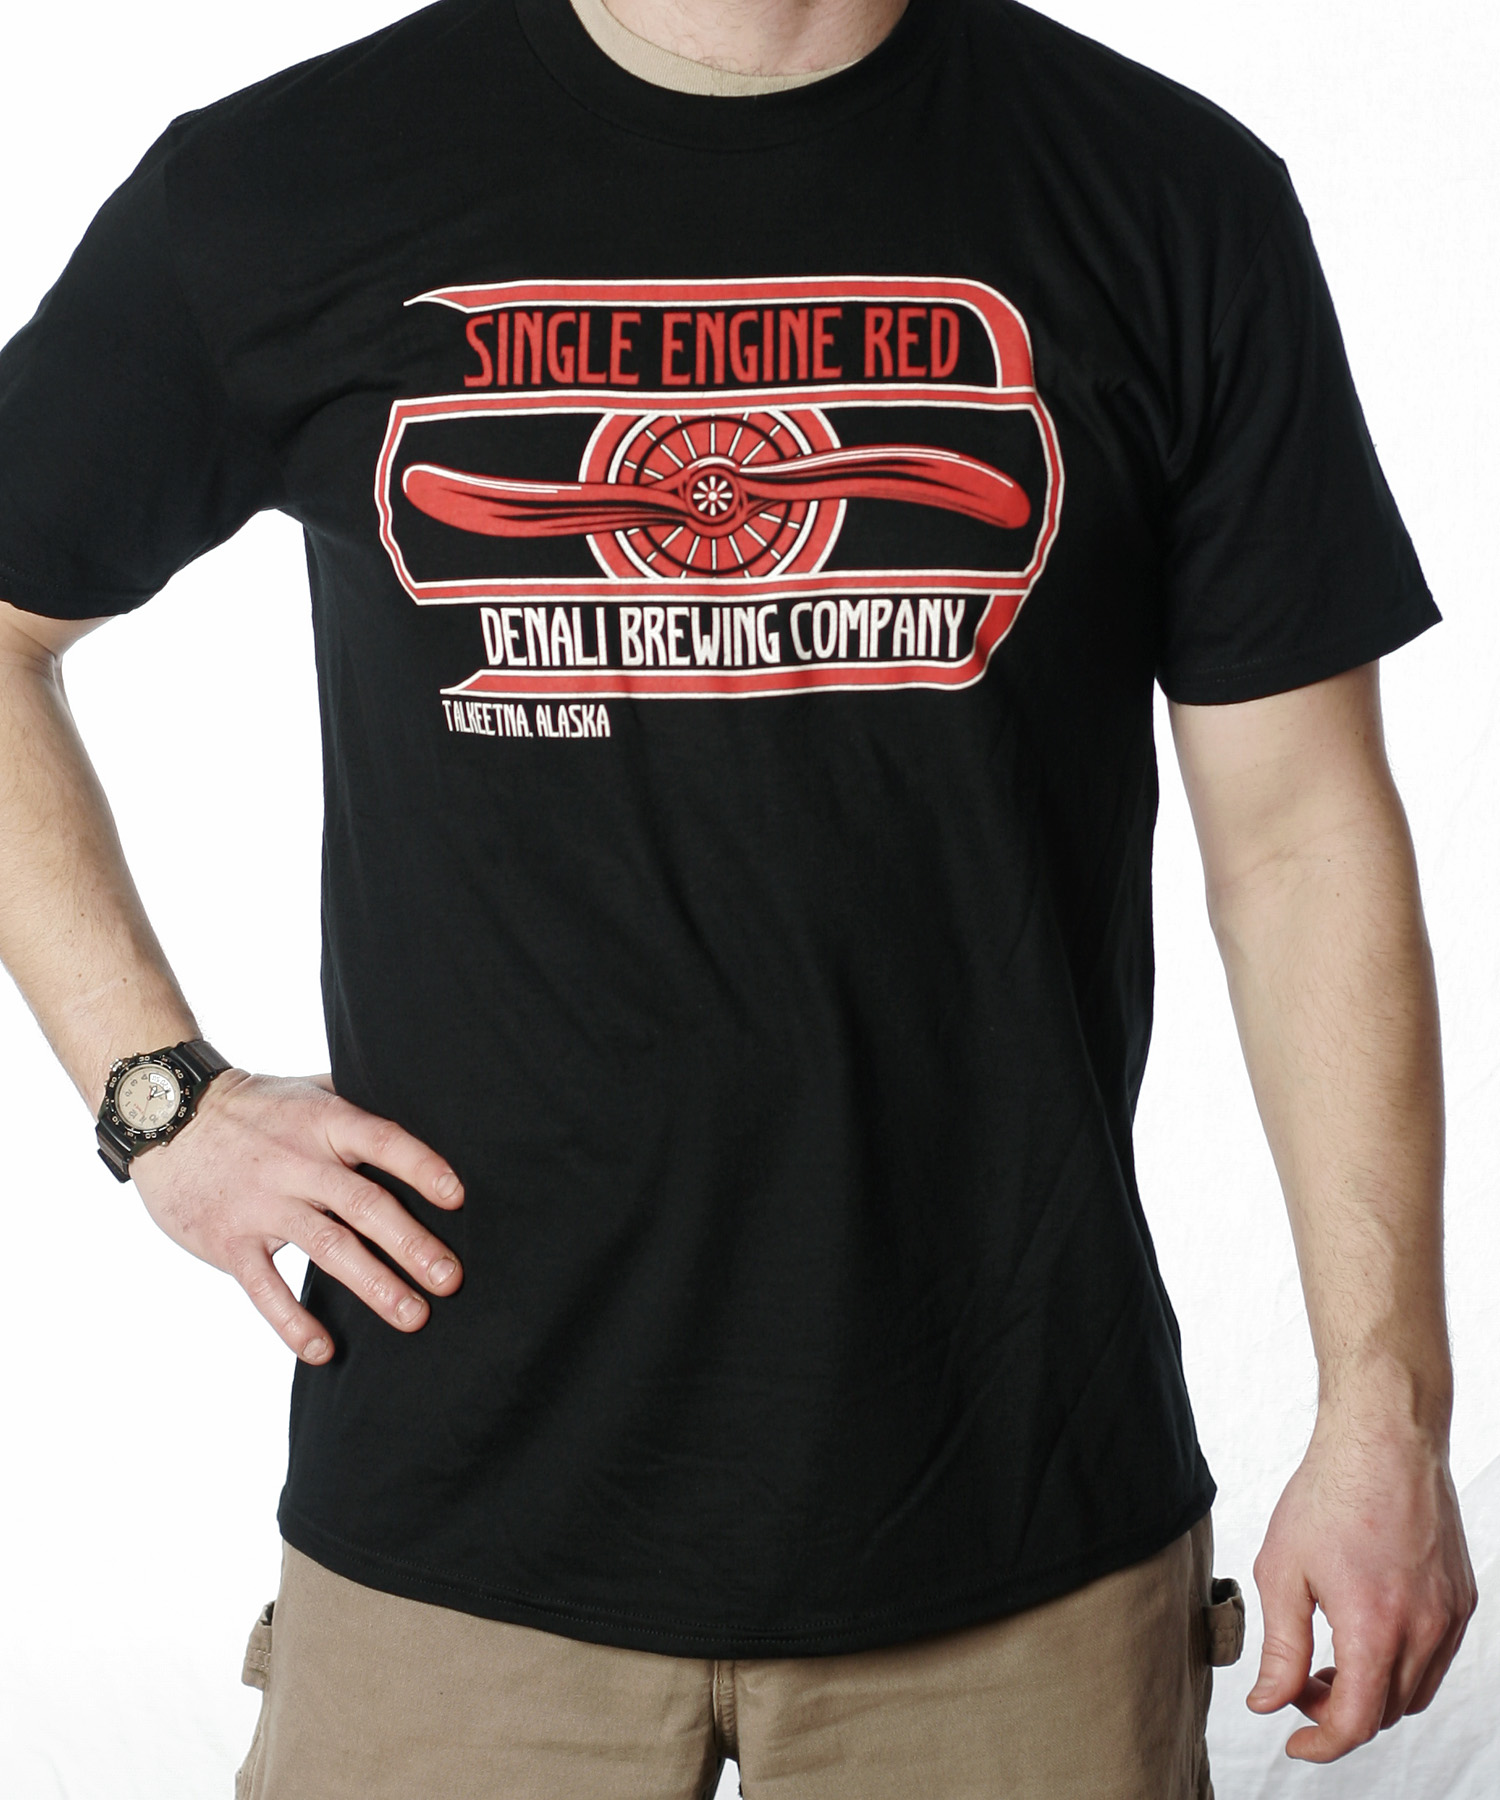 black and red mens t shirt